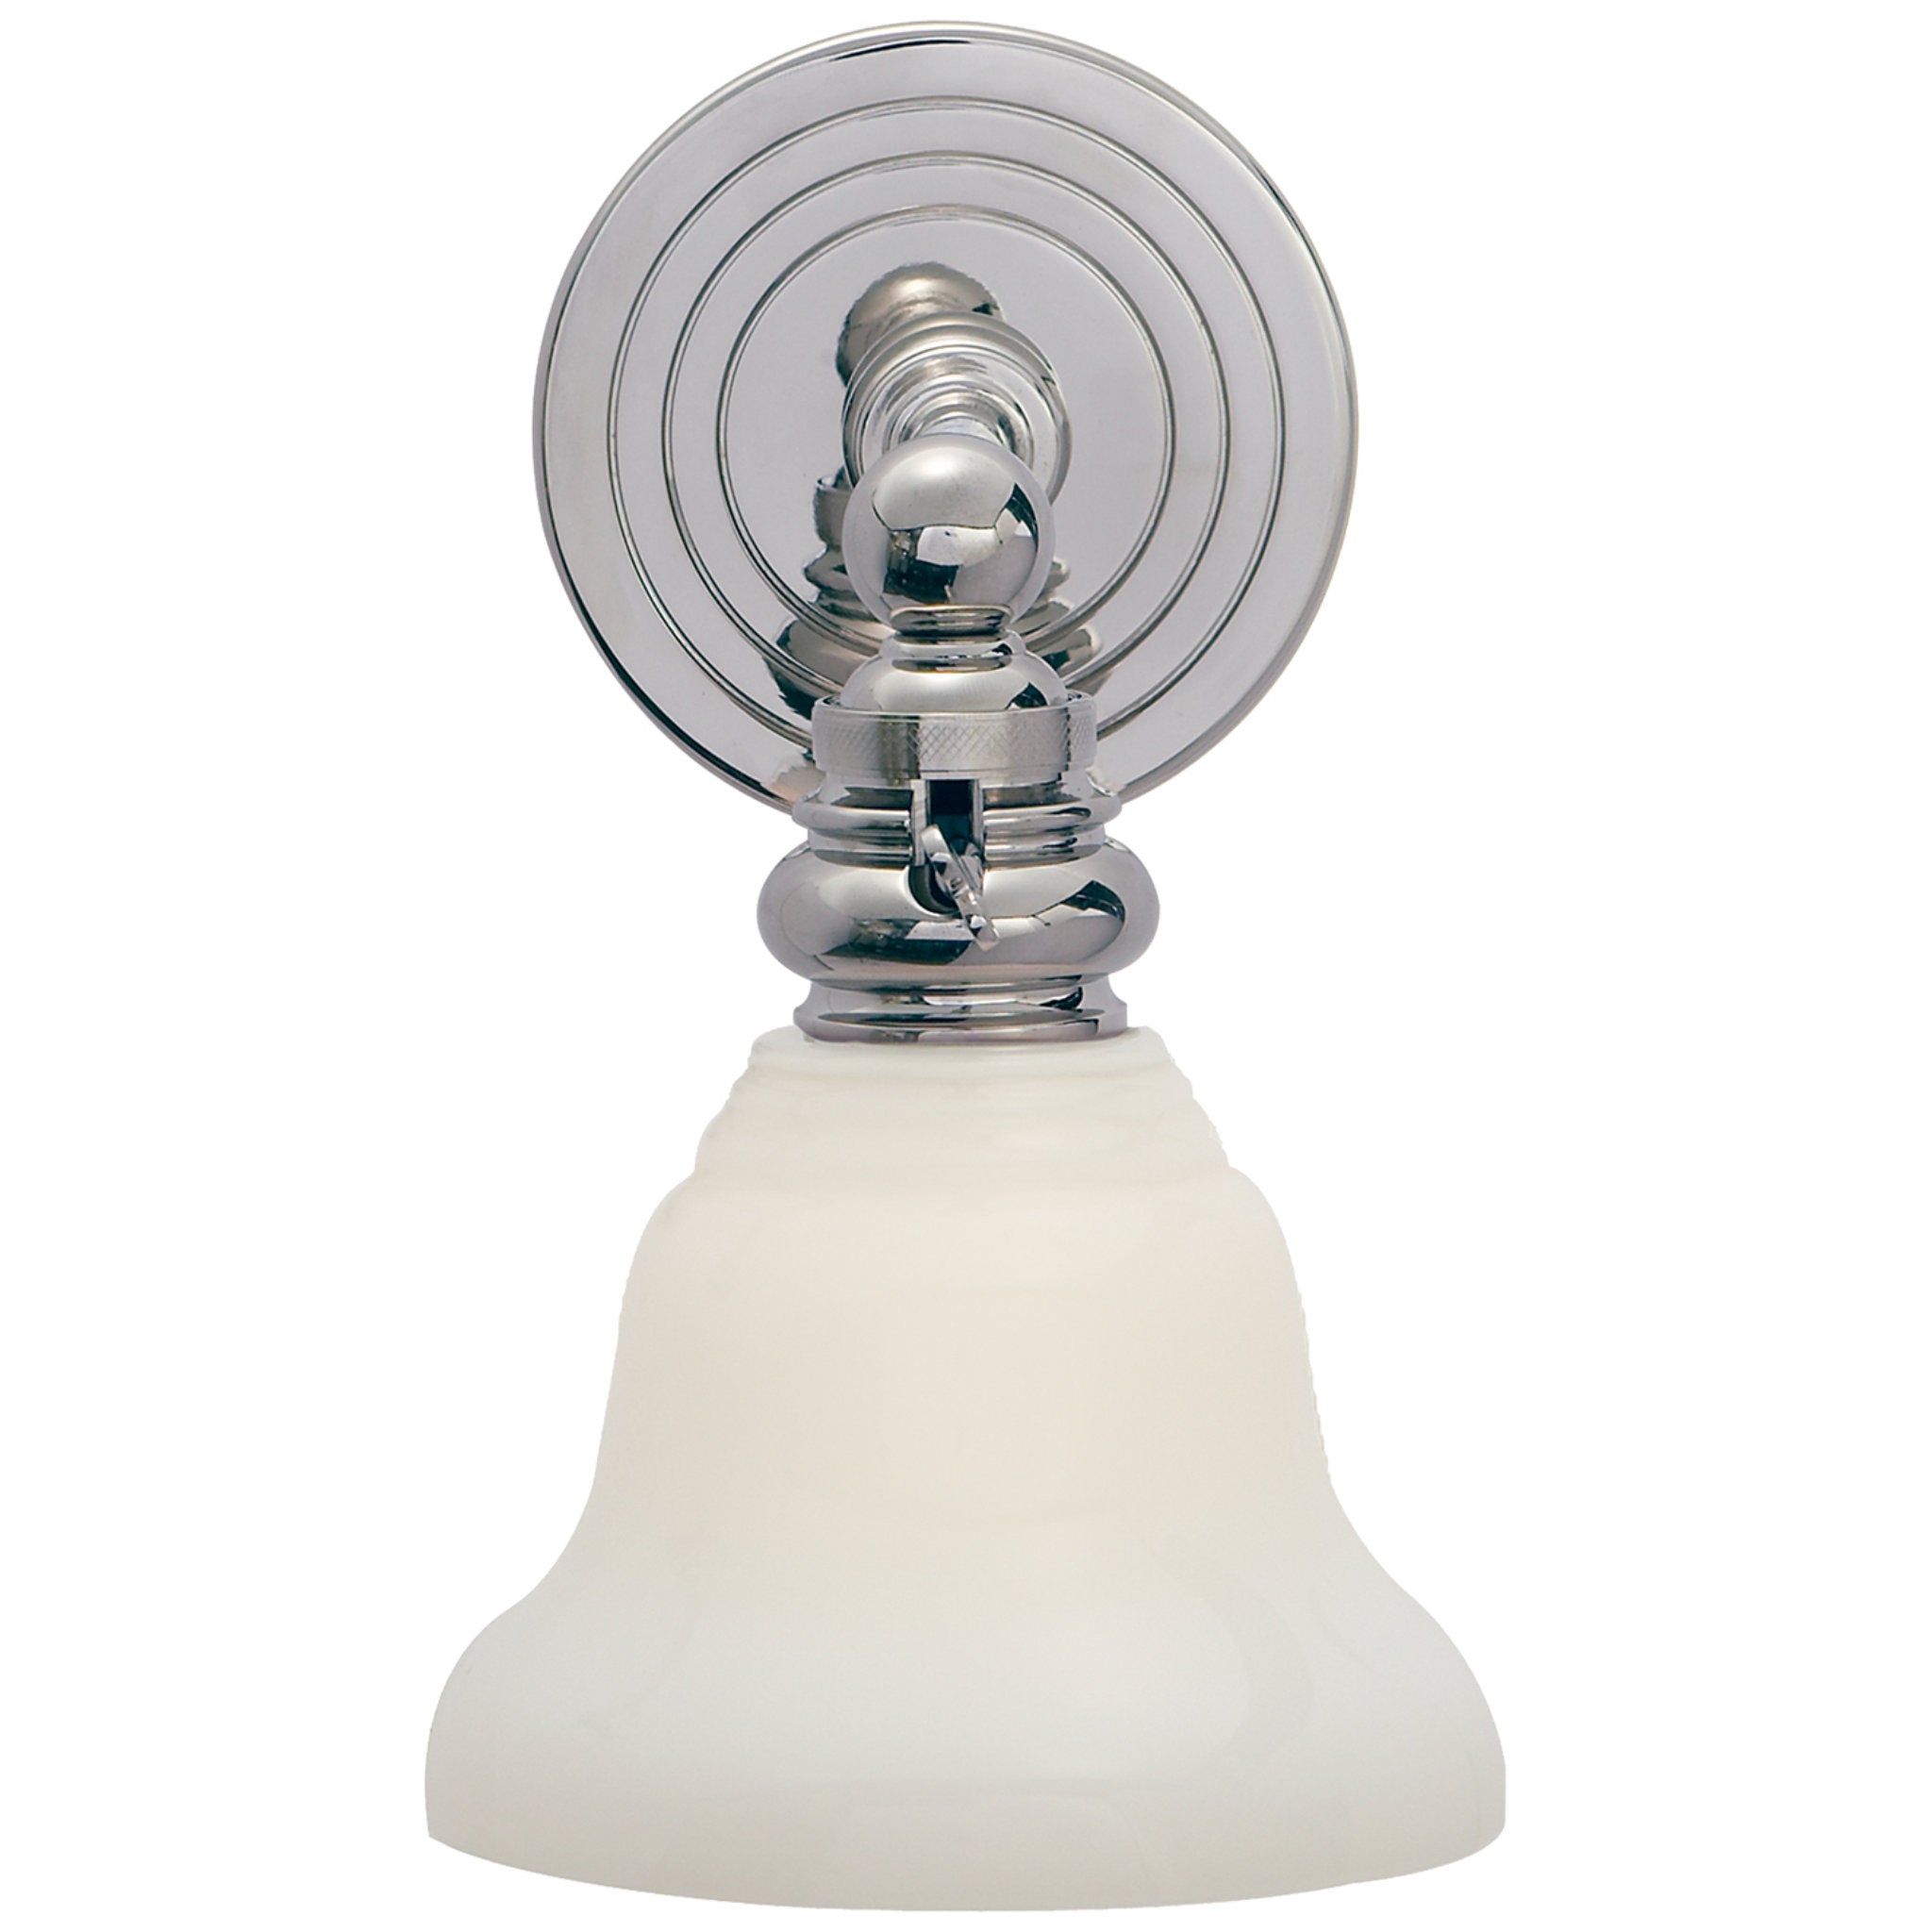 Chapman & Myers Boston Functional Single Light in Chrome with White Glass